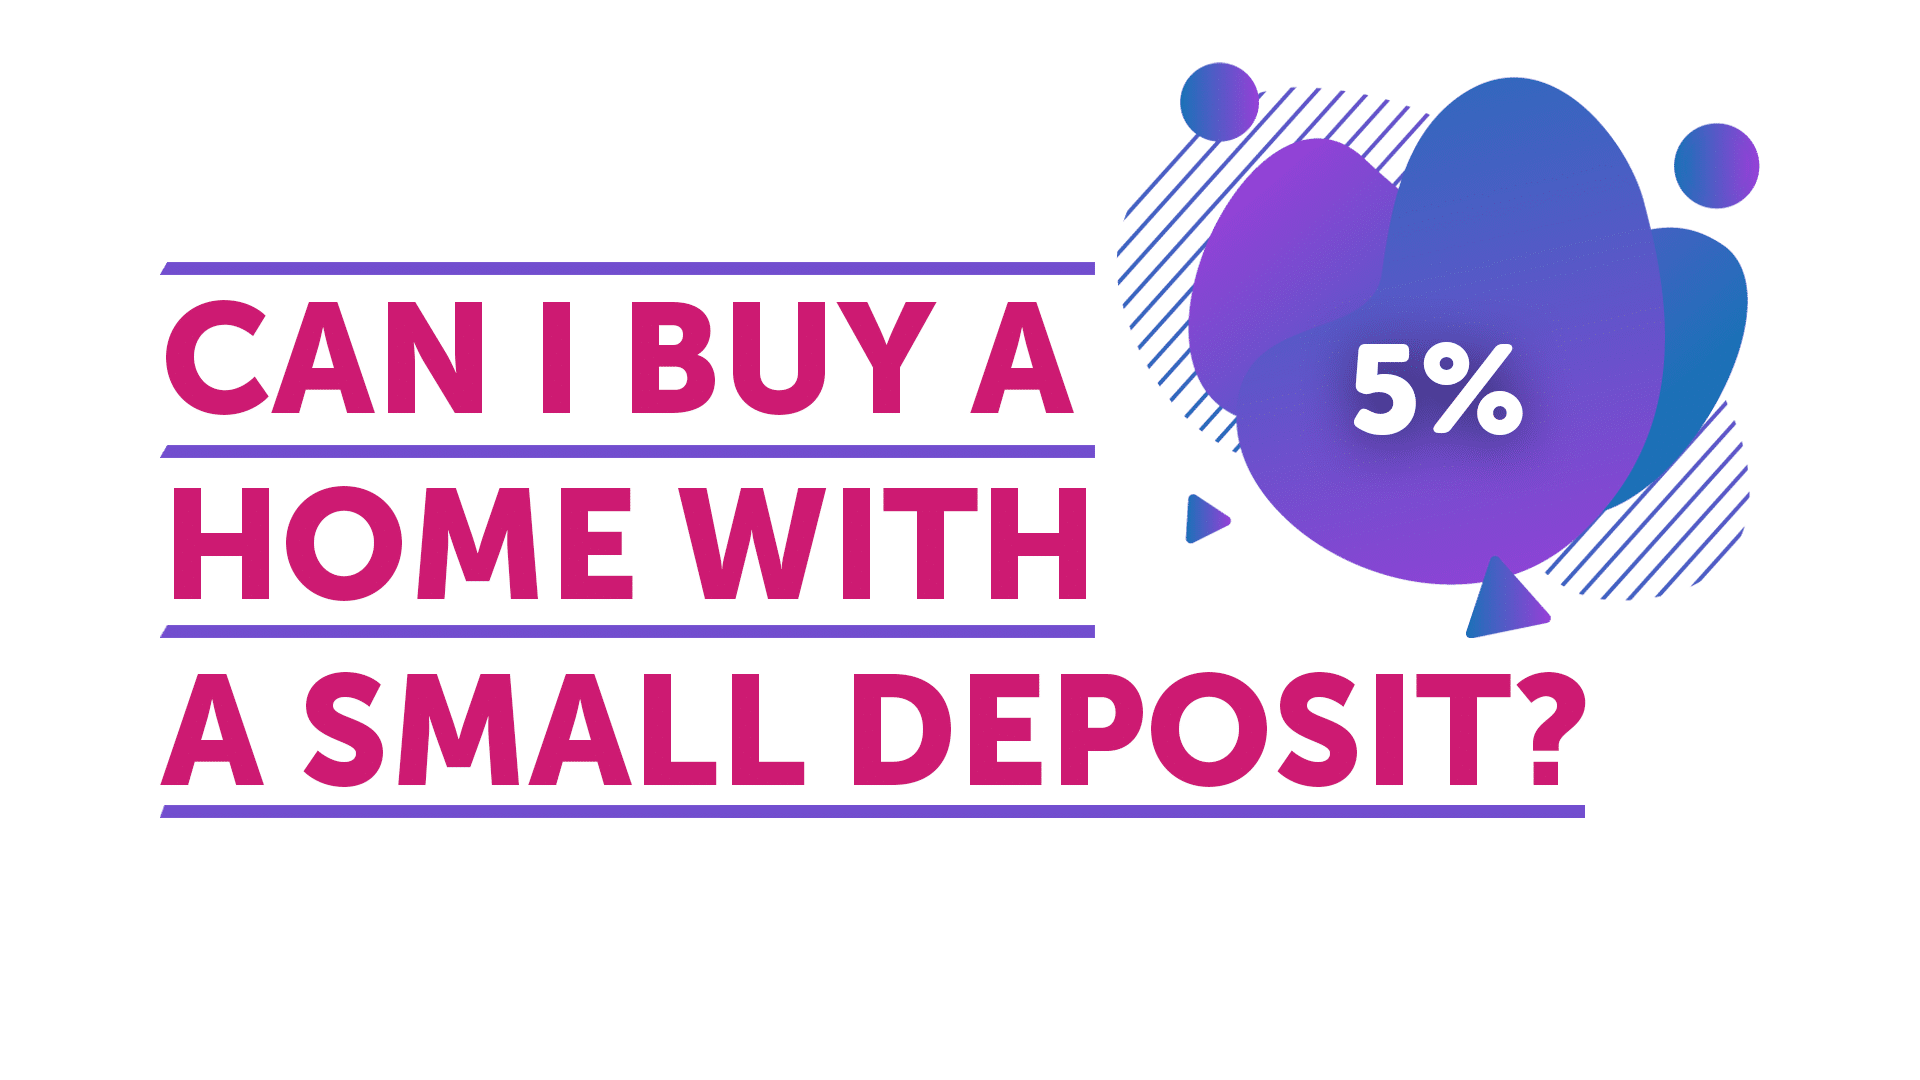 Can I buy a home with a small deposit